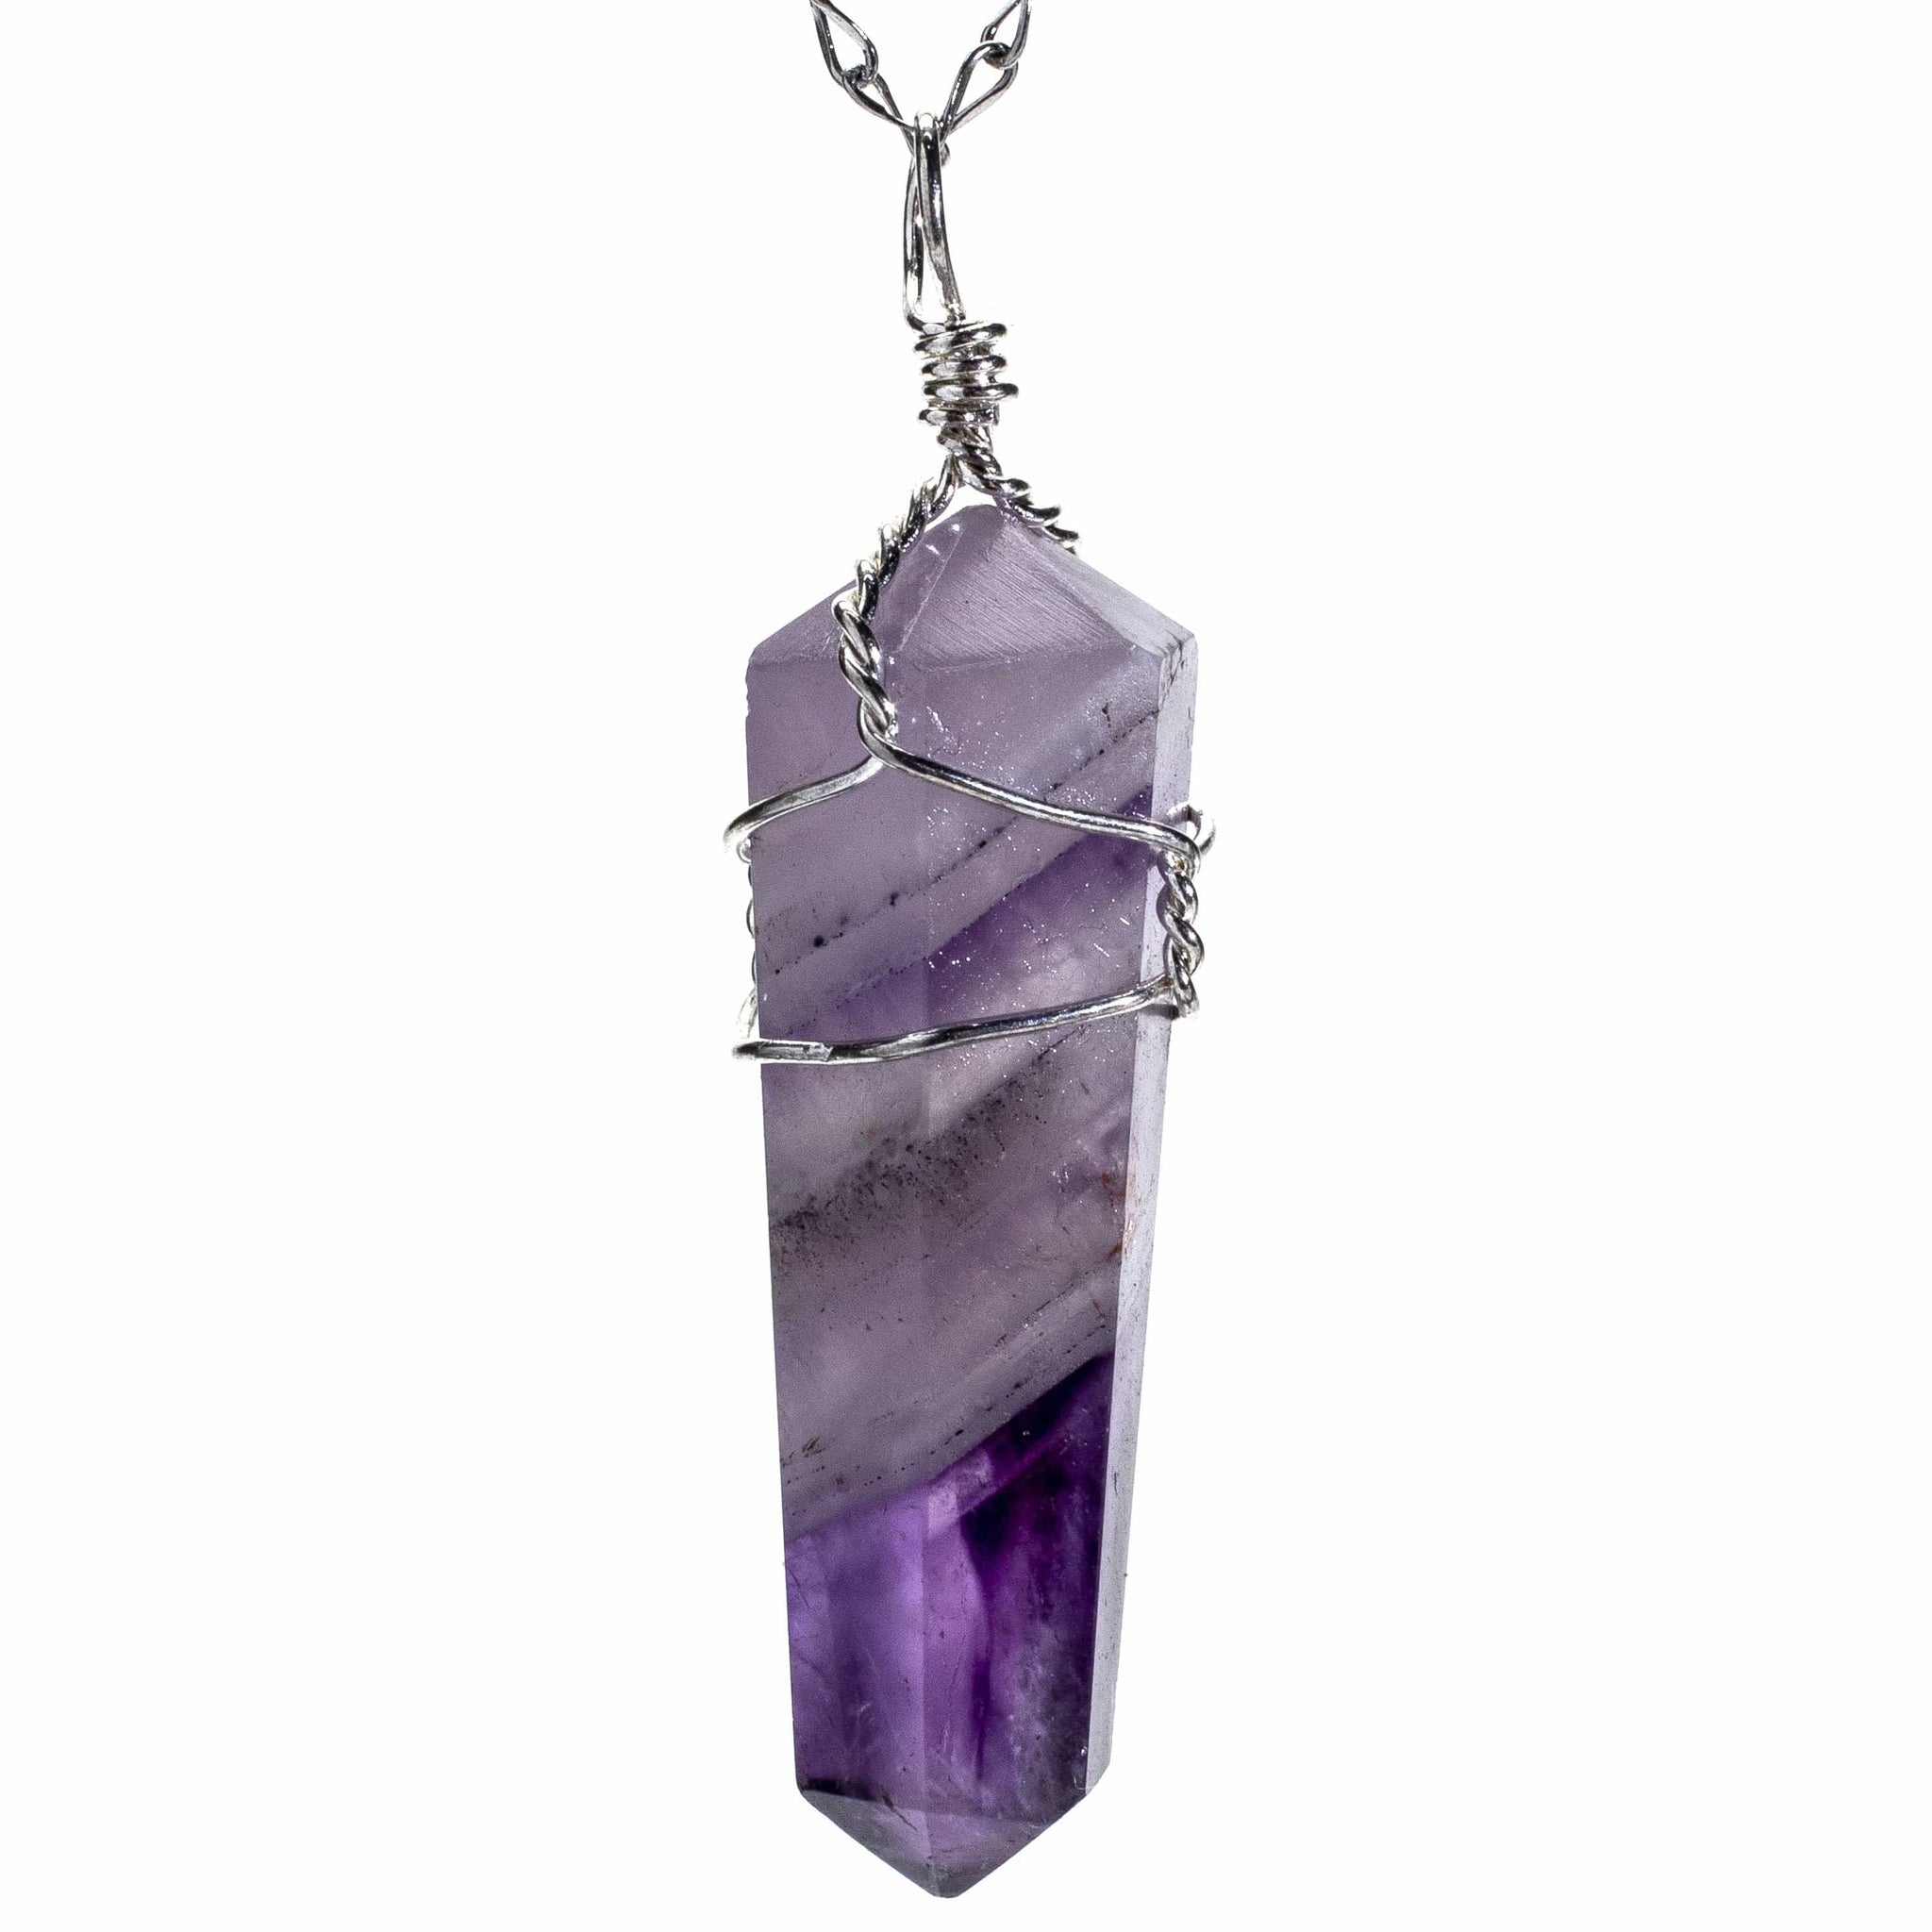 Healing Crystal Stone Pointed Necklace Natural Spiritual Gemstone Pendant  Necklaces Stress Relief Anxiety Jewelry gift for Men Women